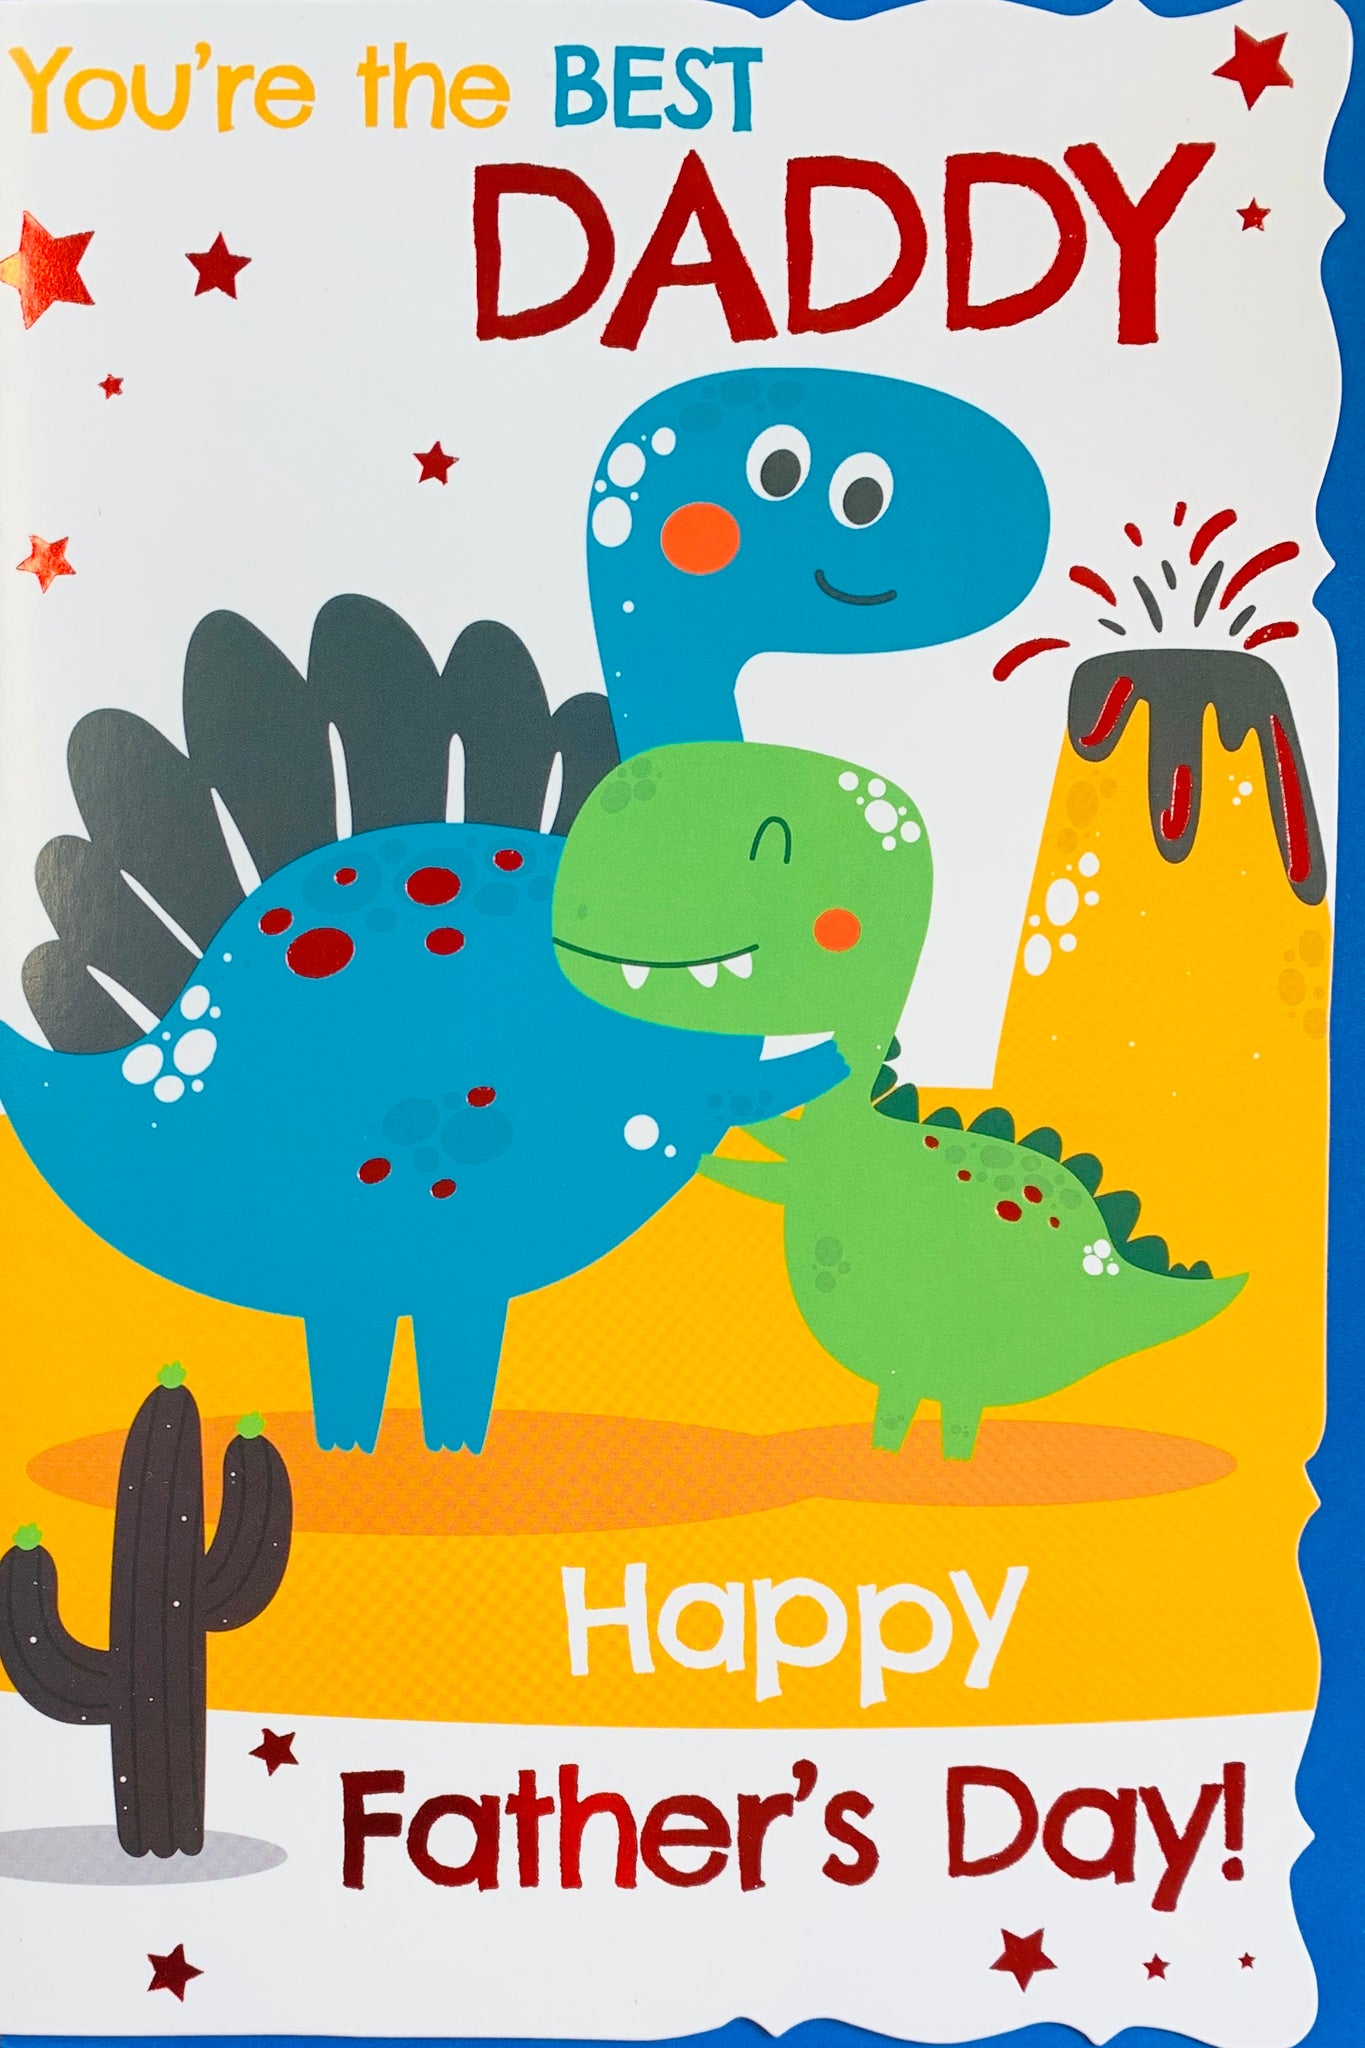 Daddy Father’s Day card cute dinosaurs